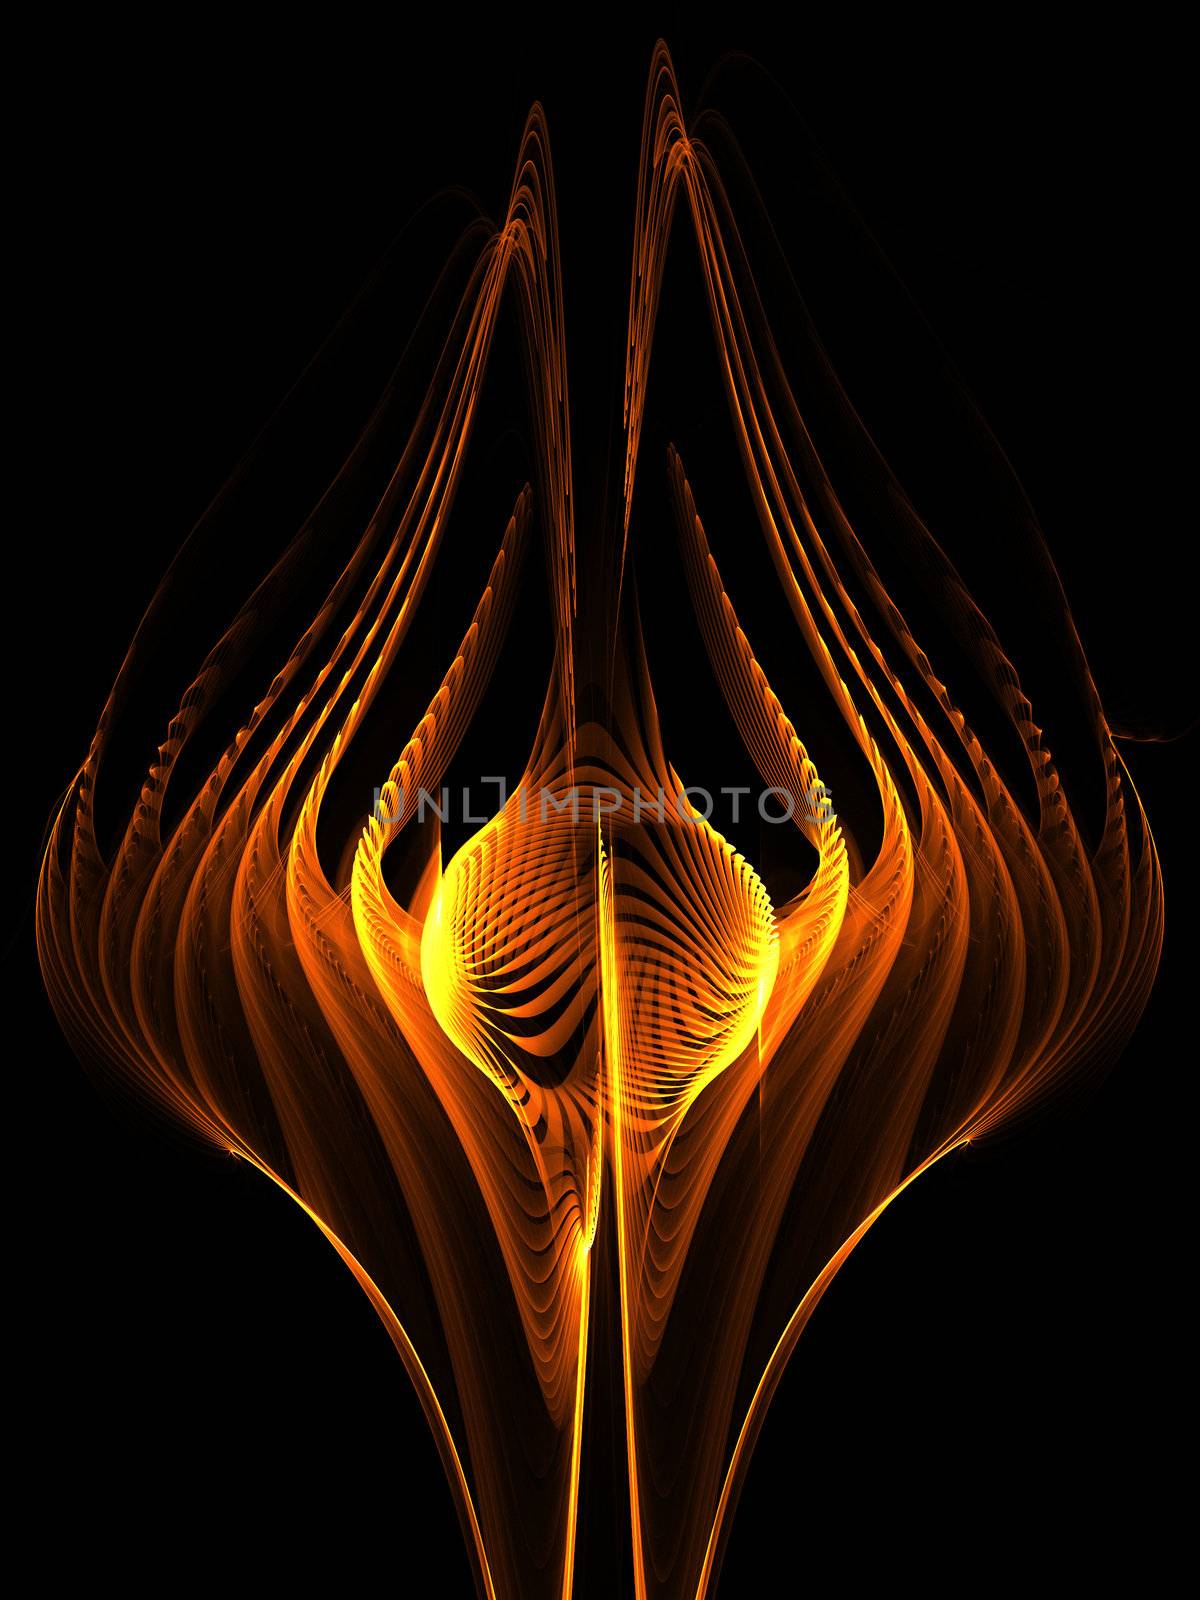 black background with abstract flame by screenexa